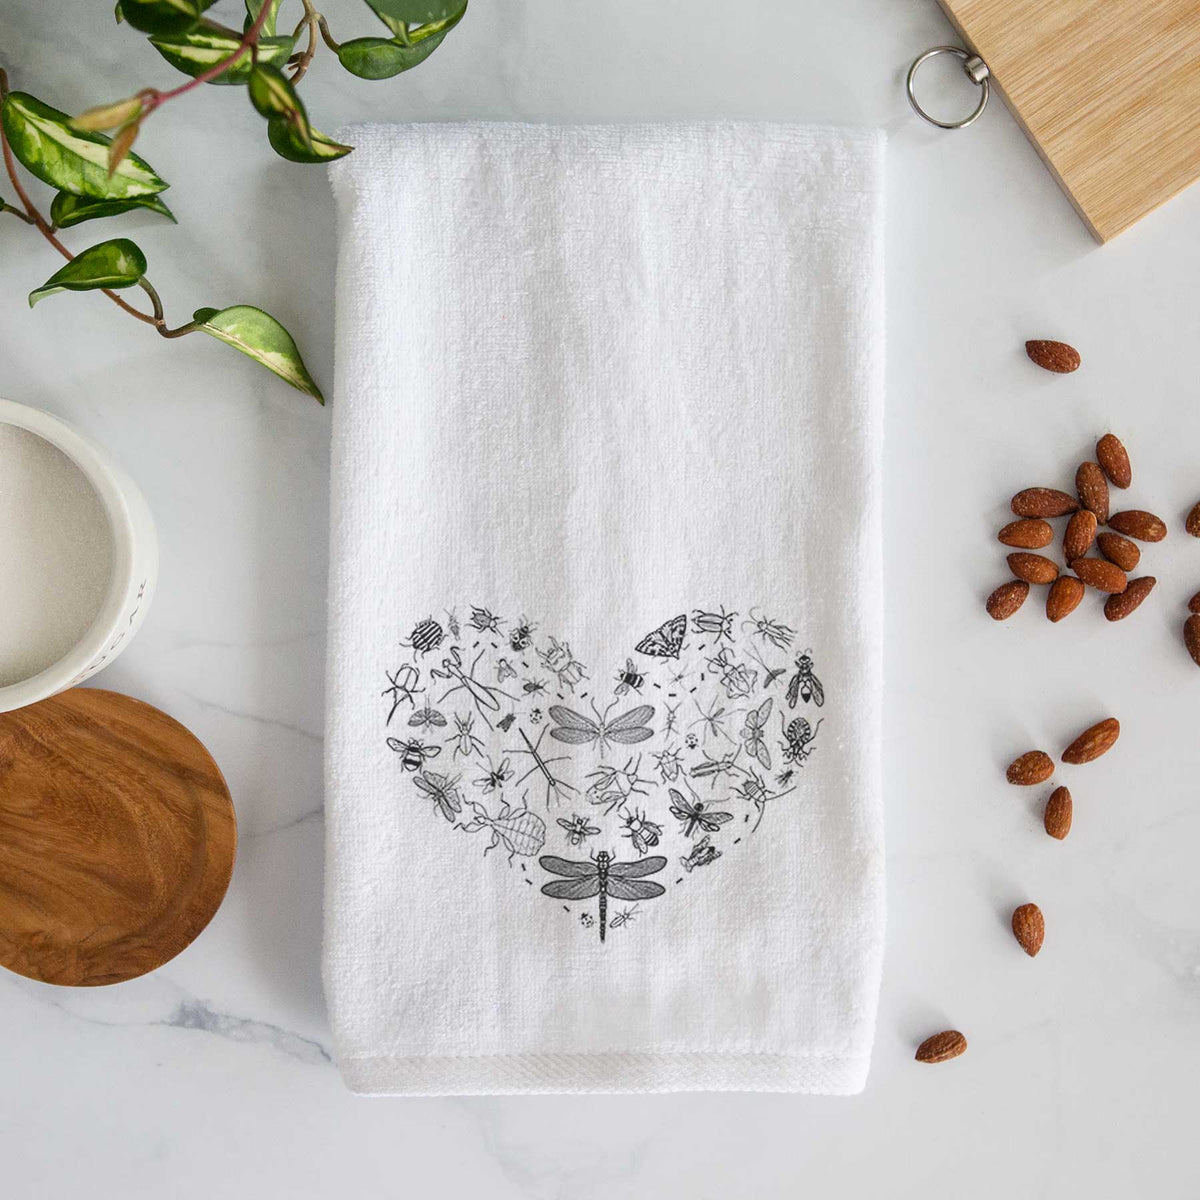 Heart Full of Insects Hand Towel